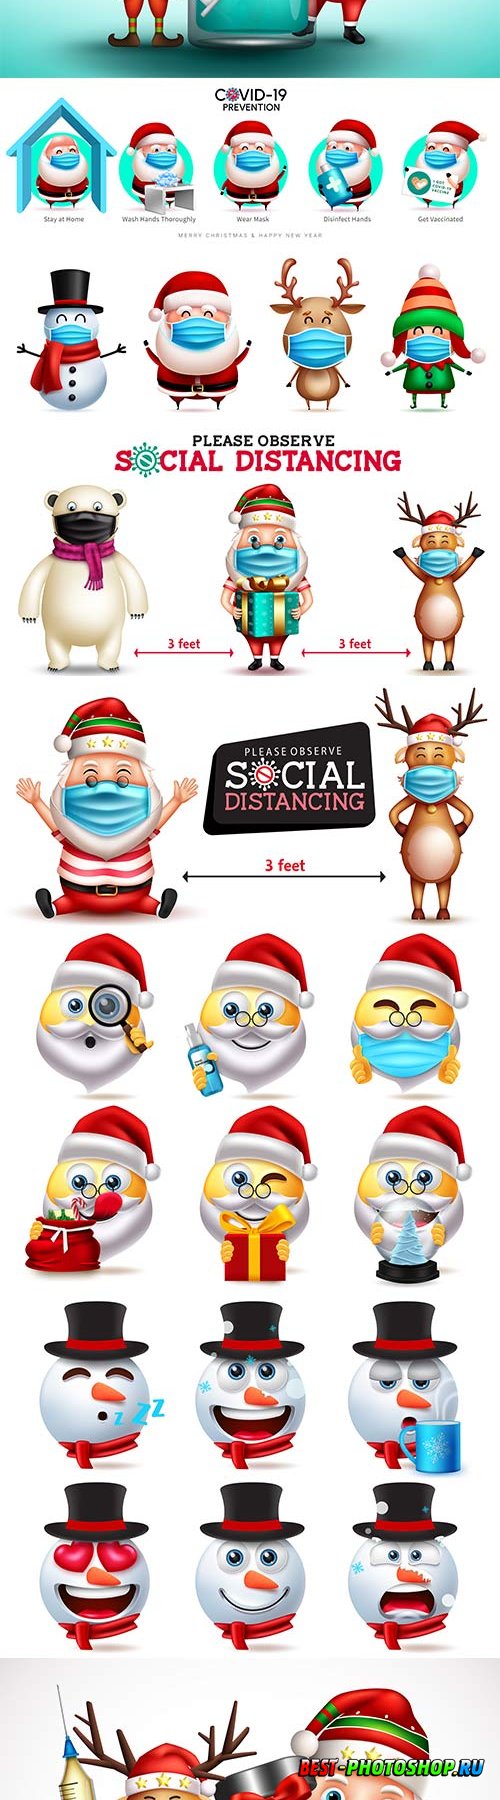 Christmas vaccine vector design christmas 3d santa claus and elf characters vector